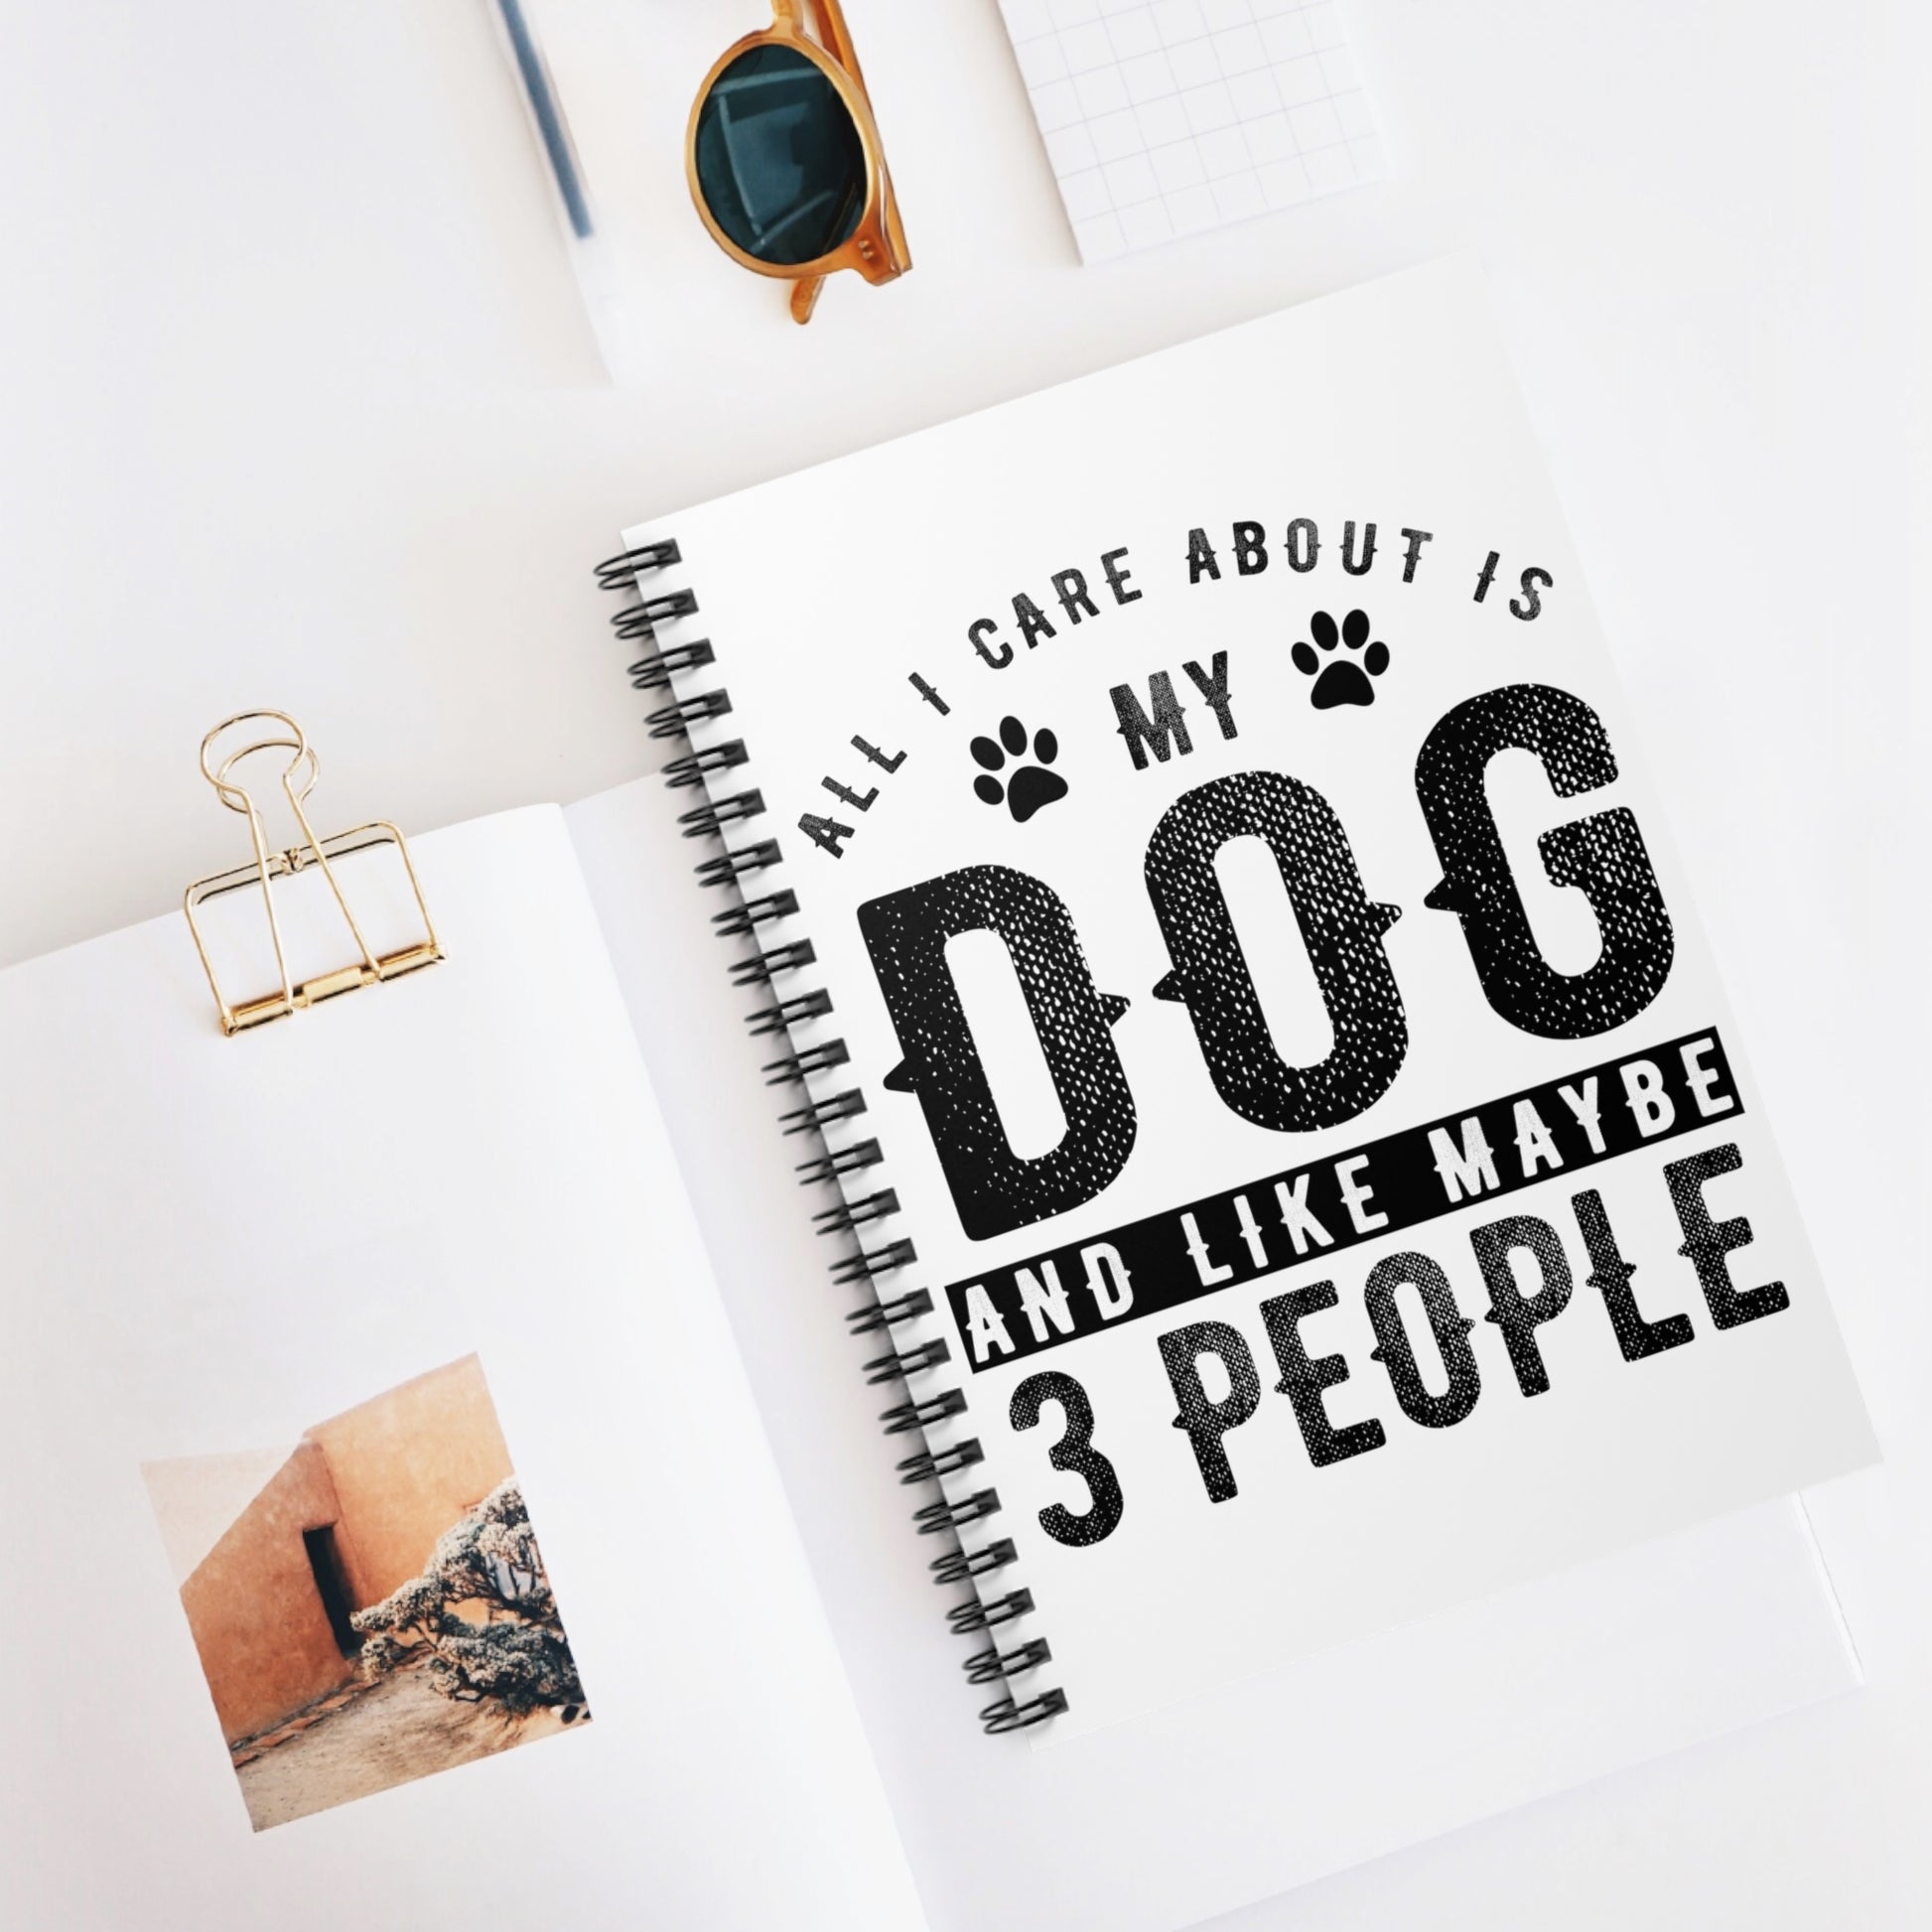 I Like My Dog: Spiral Notebook - Log Books - Journals - Diaries - and More Custom Printed by TheGlassyLass